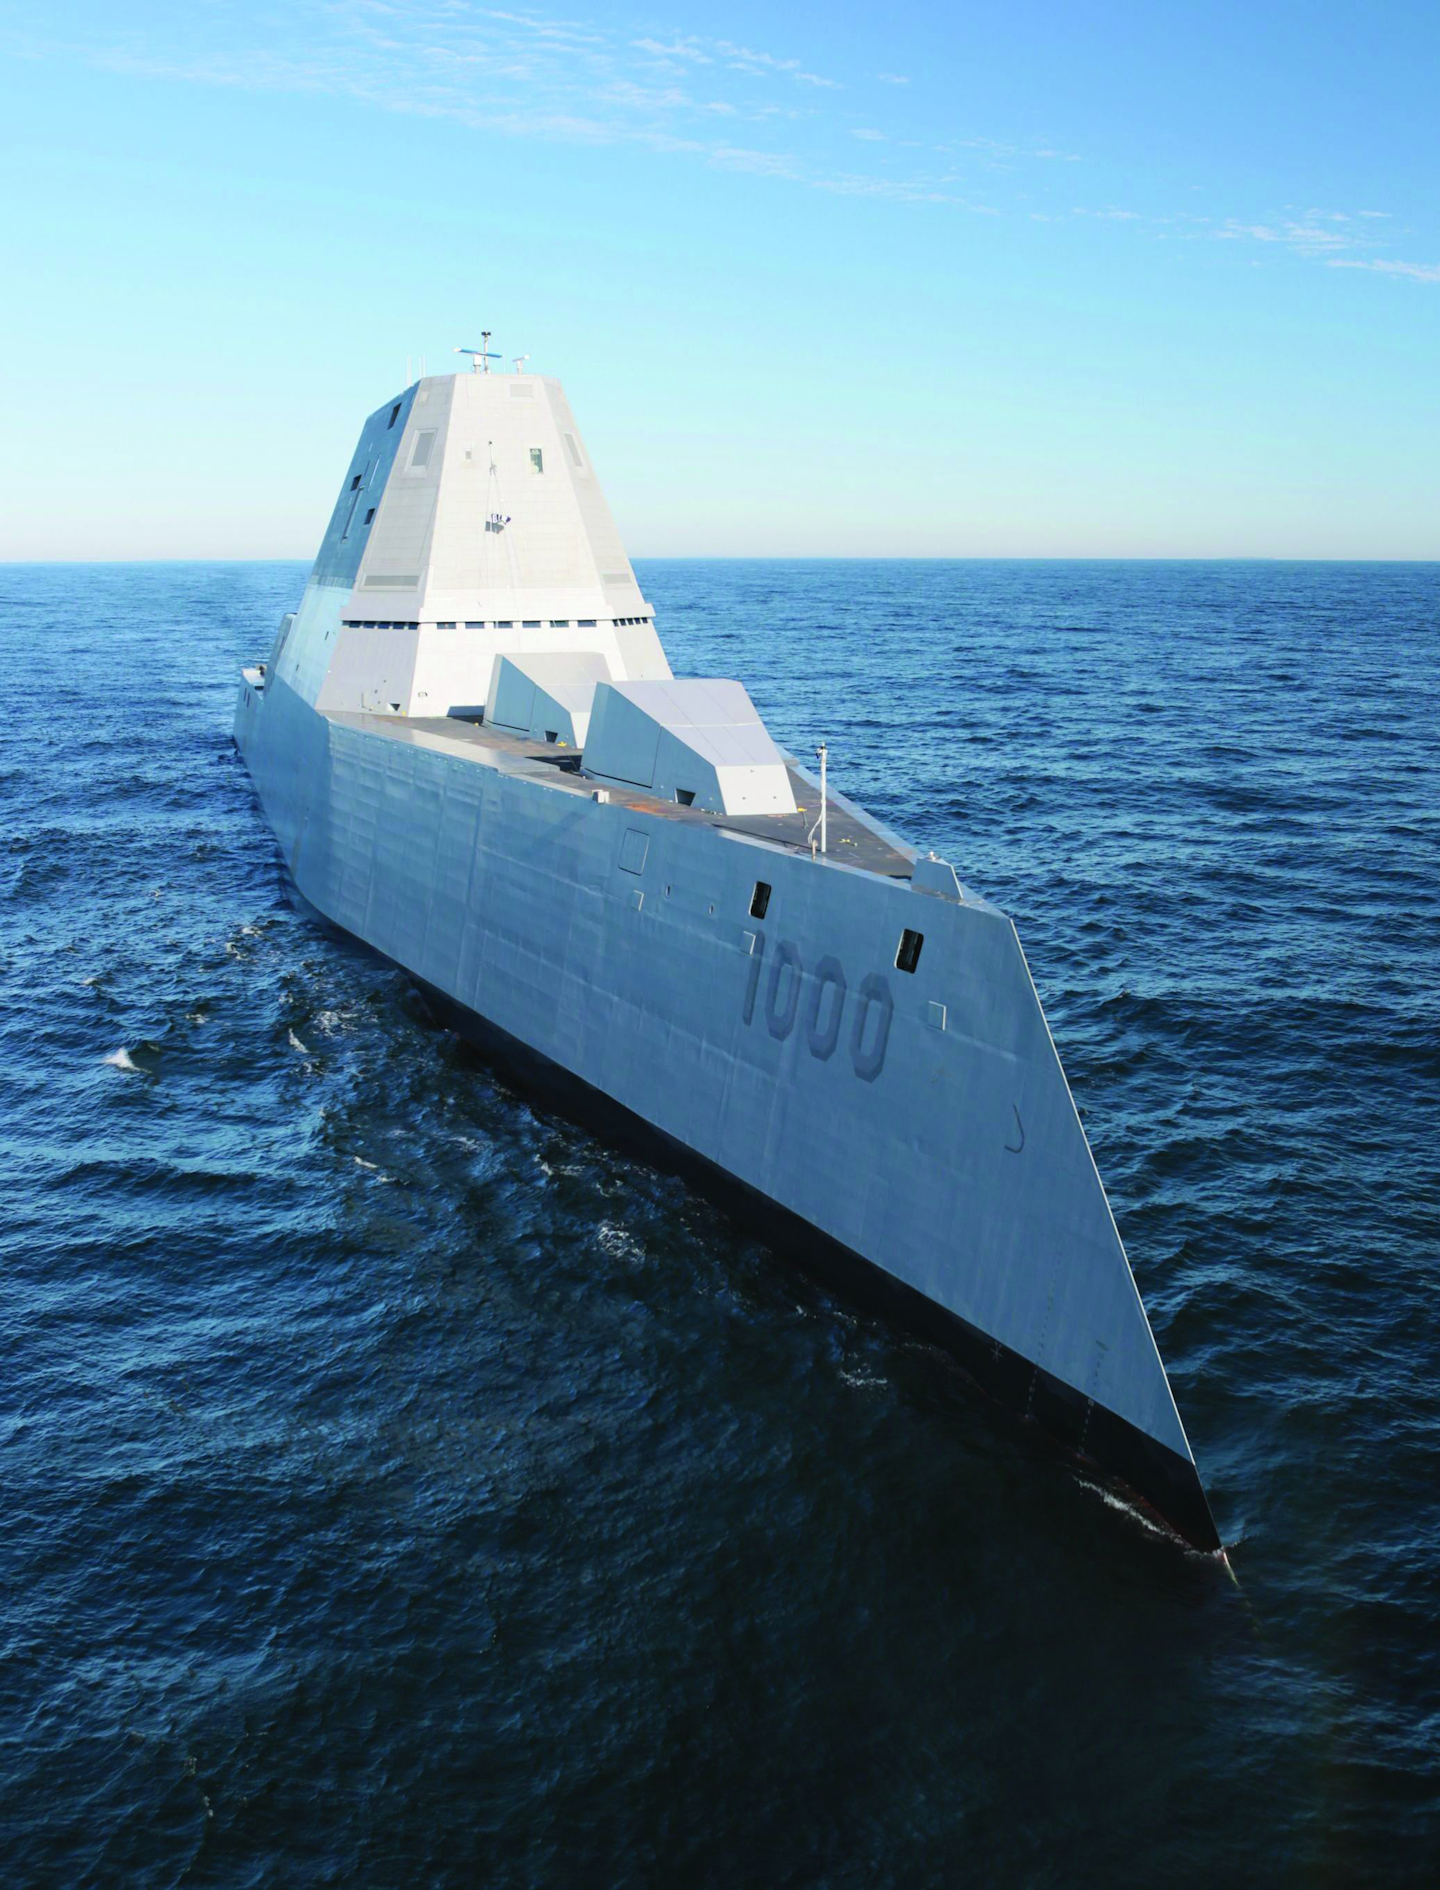 How do ships get from marinette wi to the ocean Navy Ship Building And Shipboard Electronics Strive To Do More With Less Military Aerospace Electronics